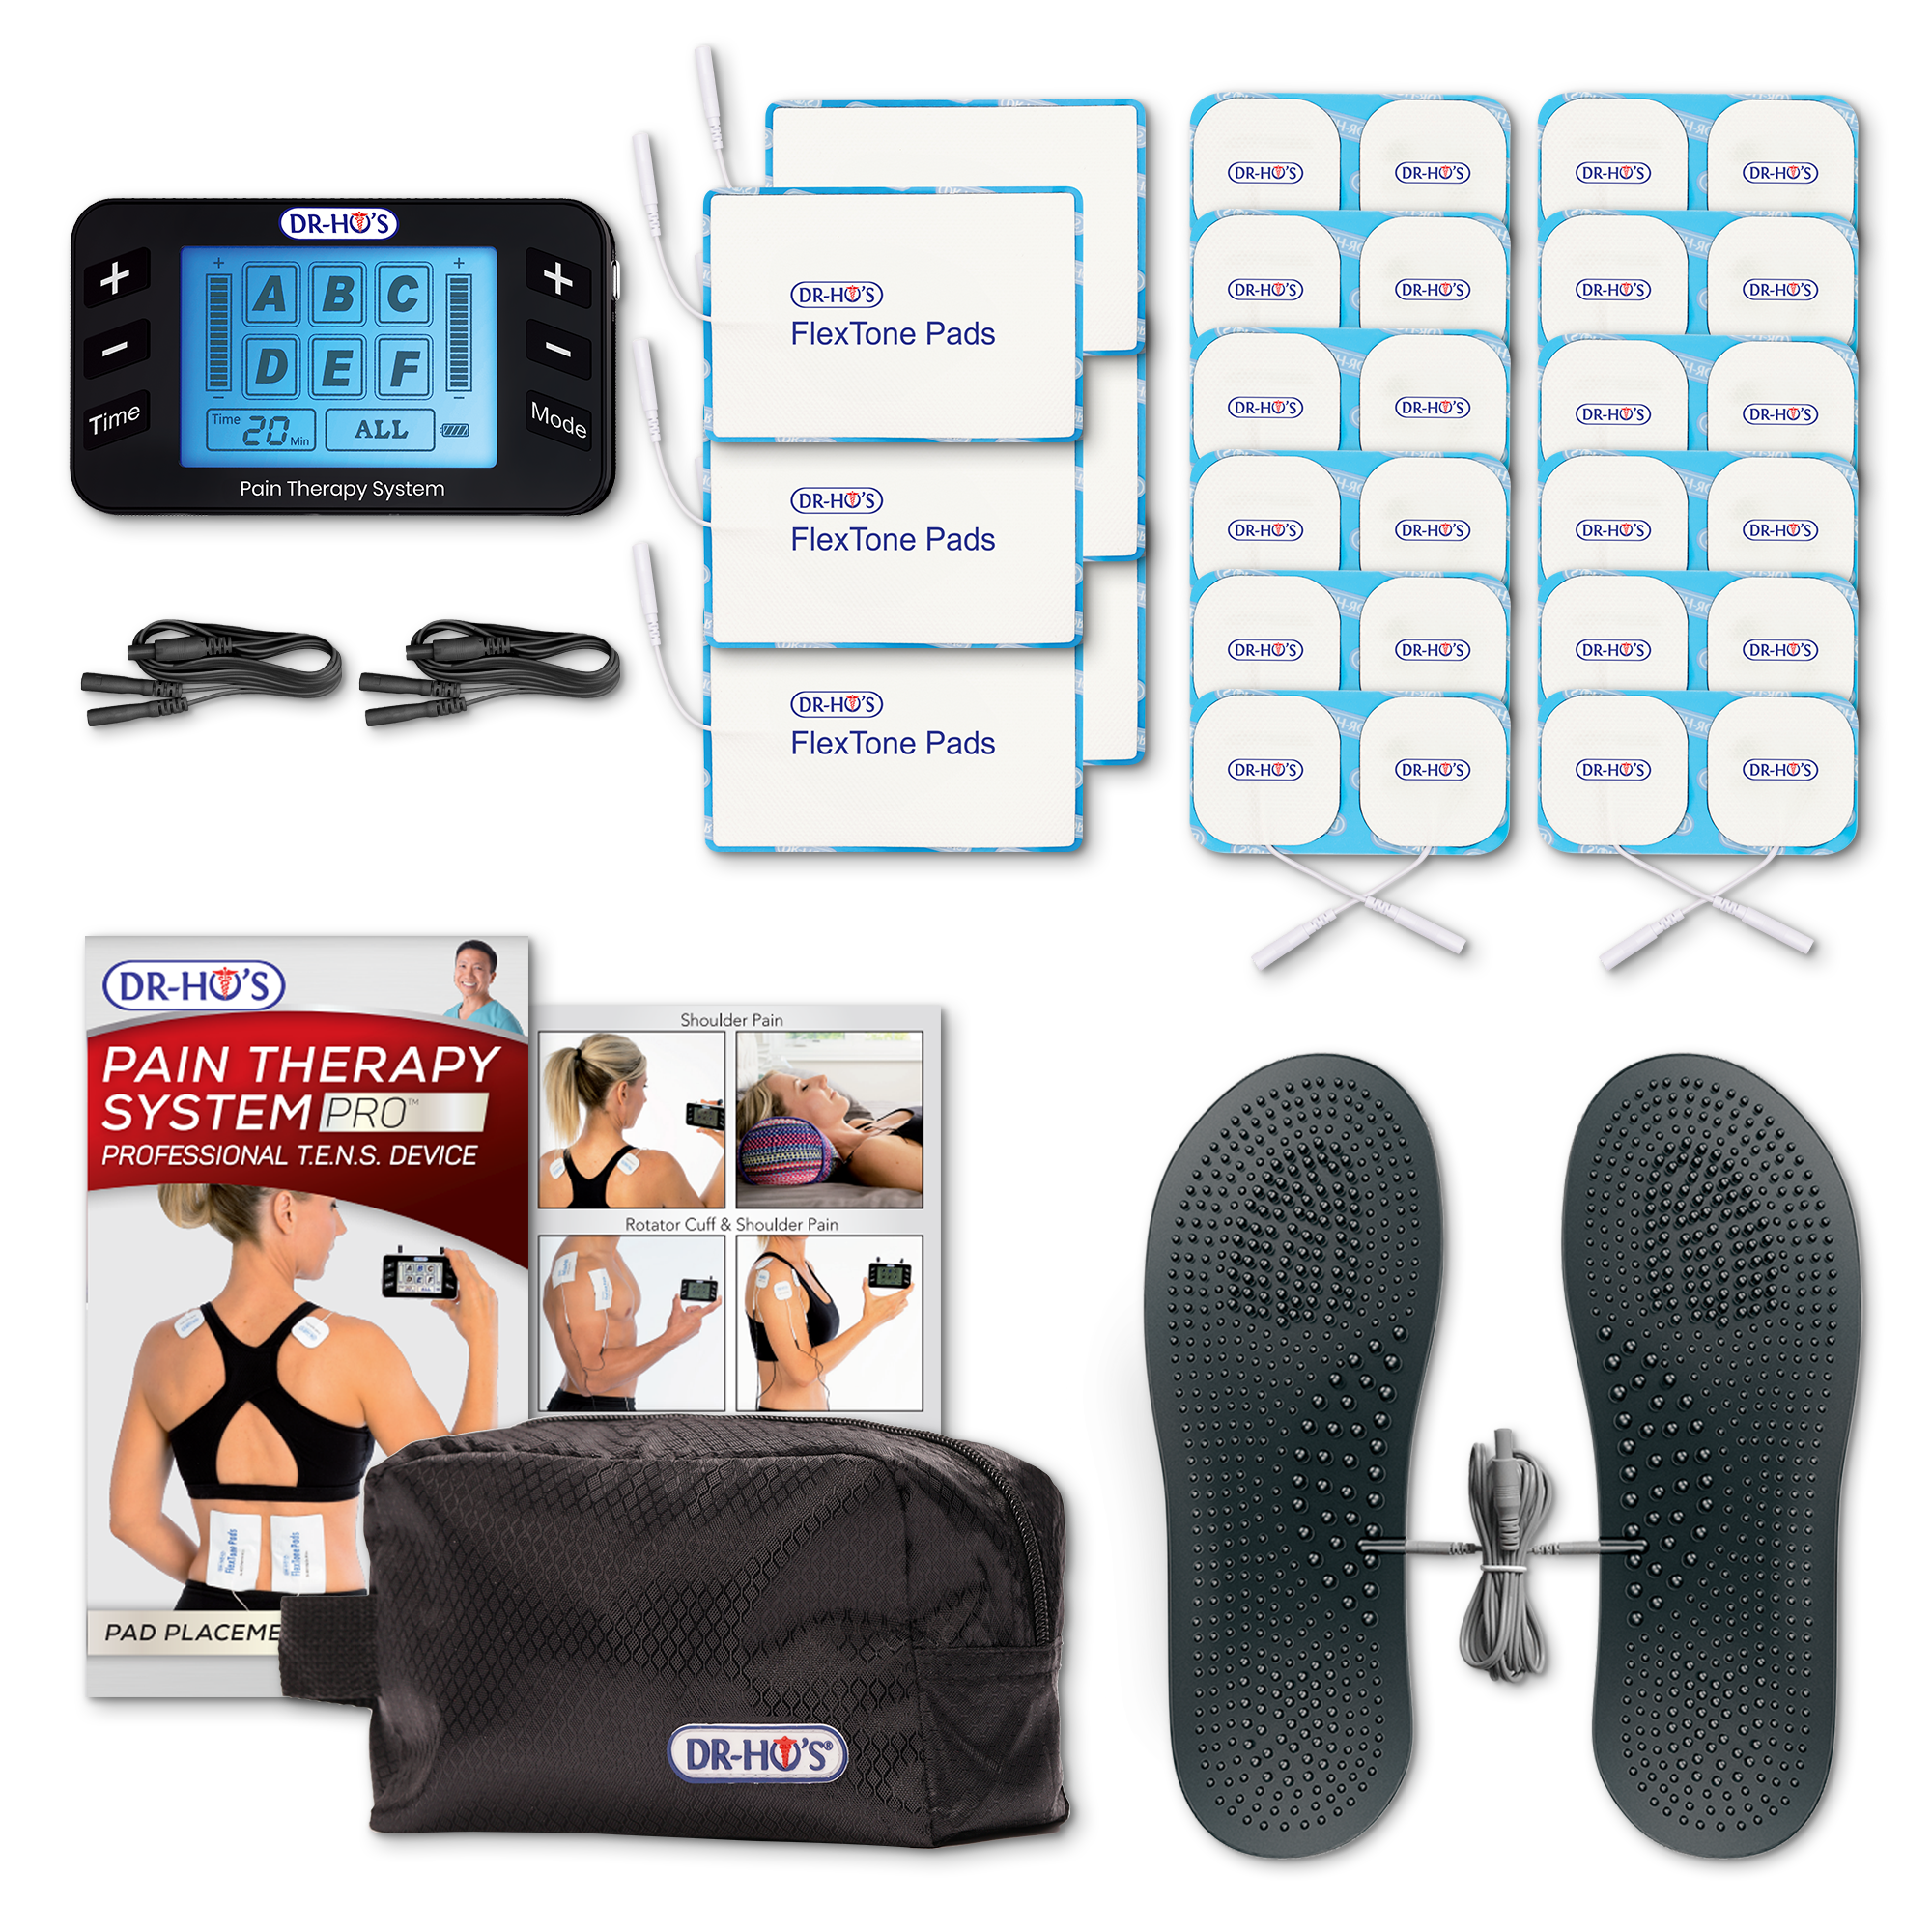 Pain Therapy System Pro - Deluxe Package